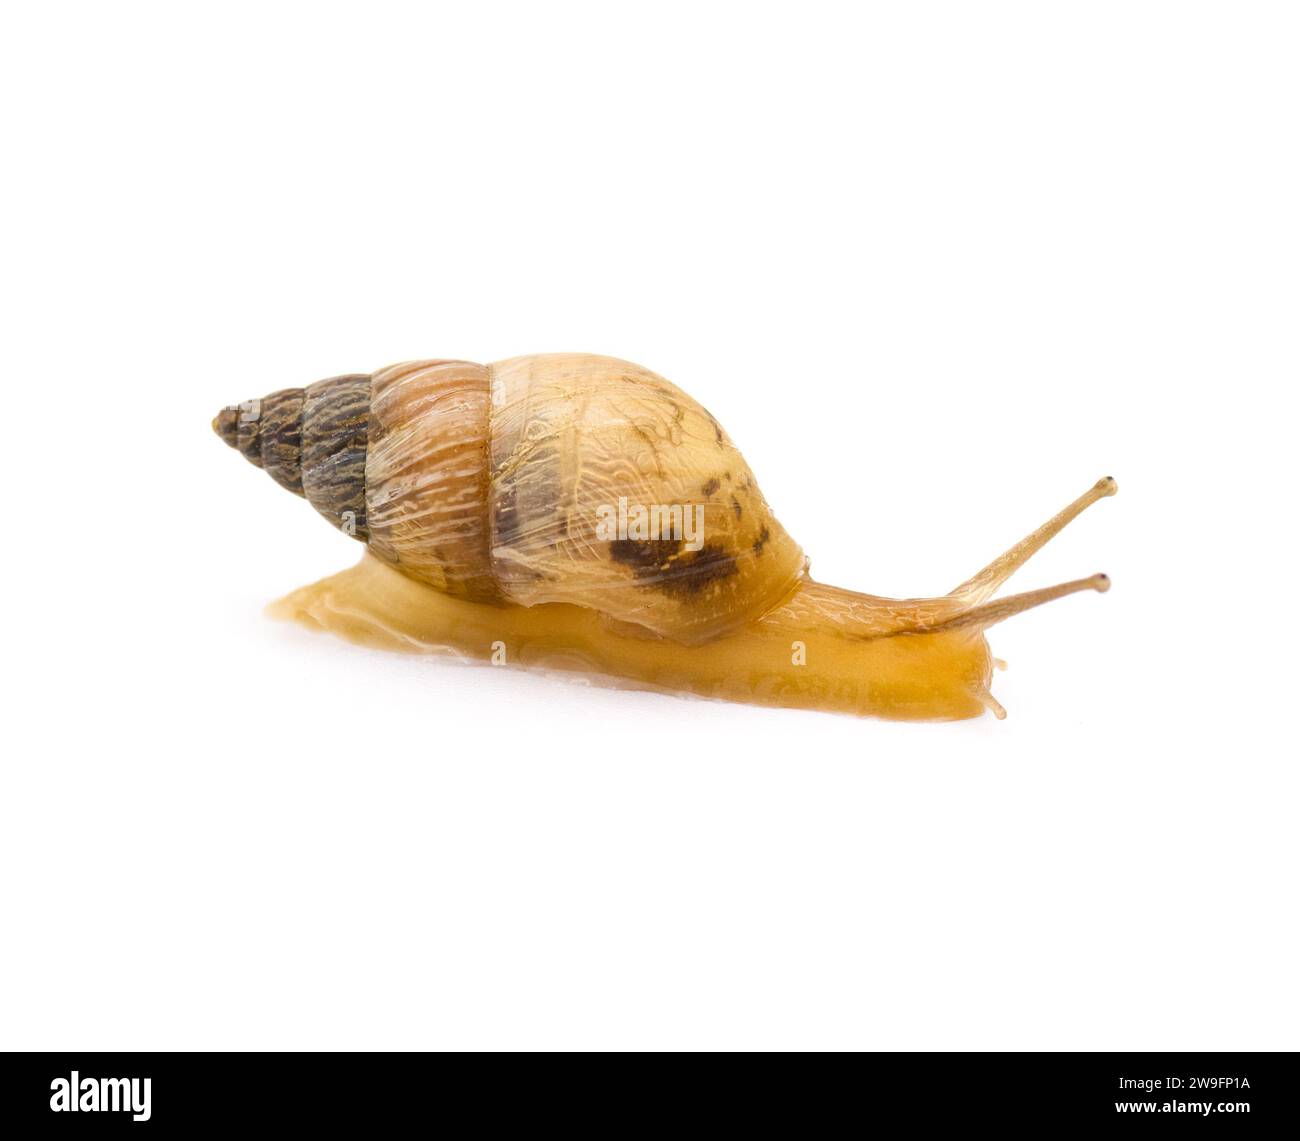 Ghost Bulimulus - Bulimulus sporadicus or Bonairensis invasive species of terrestrial land snail in Florida isolated on white background side profile Stock Photo